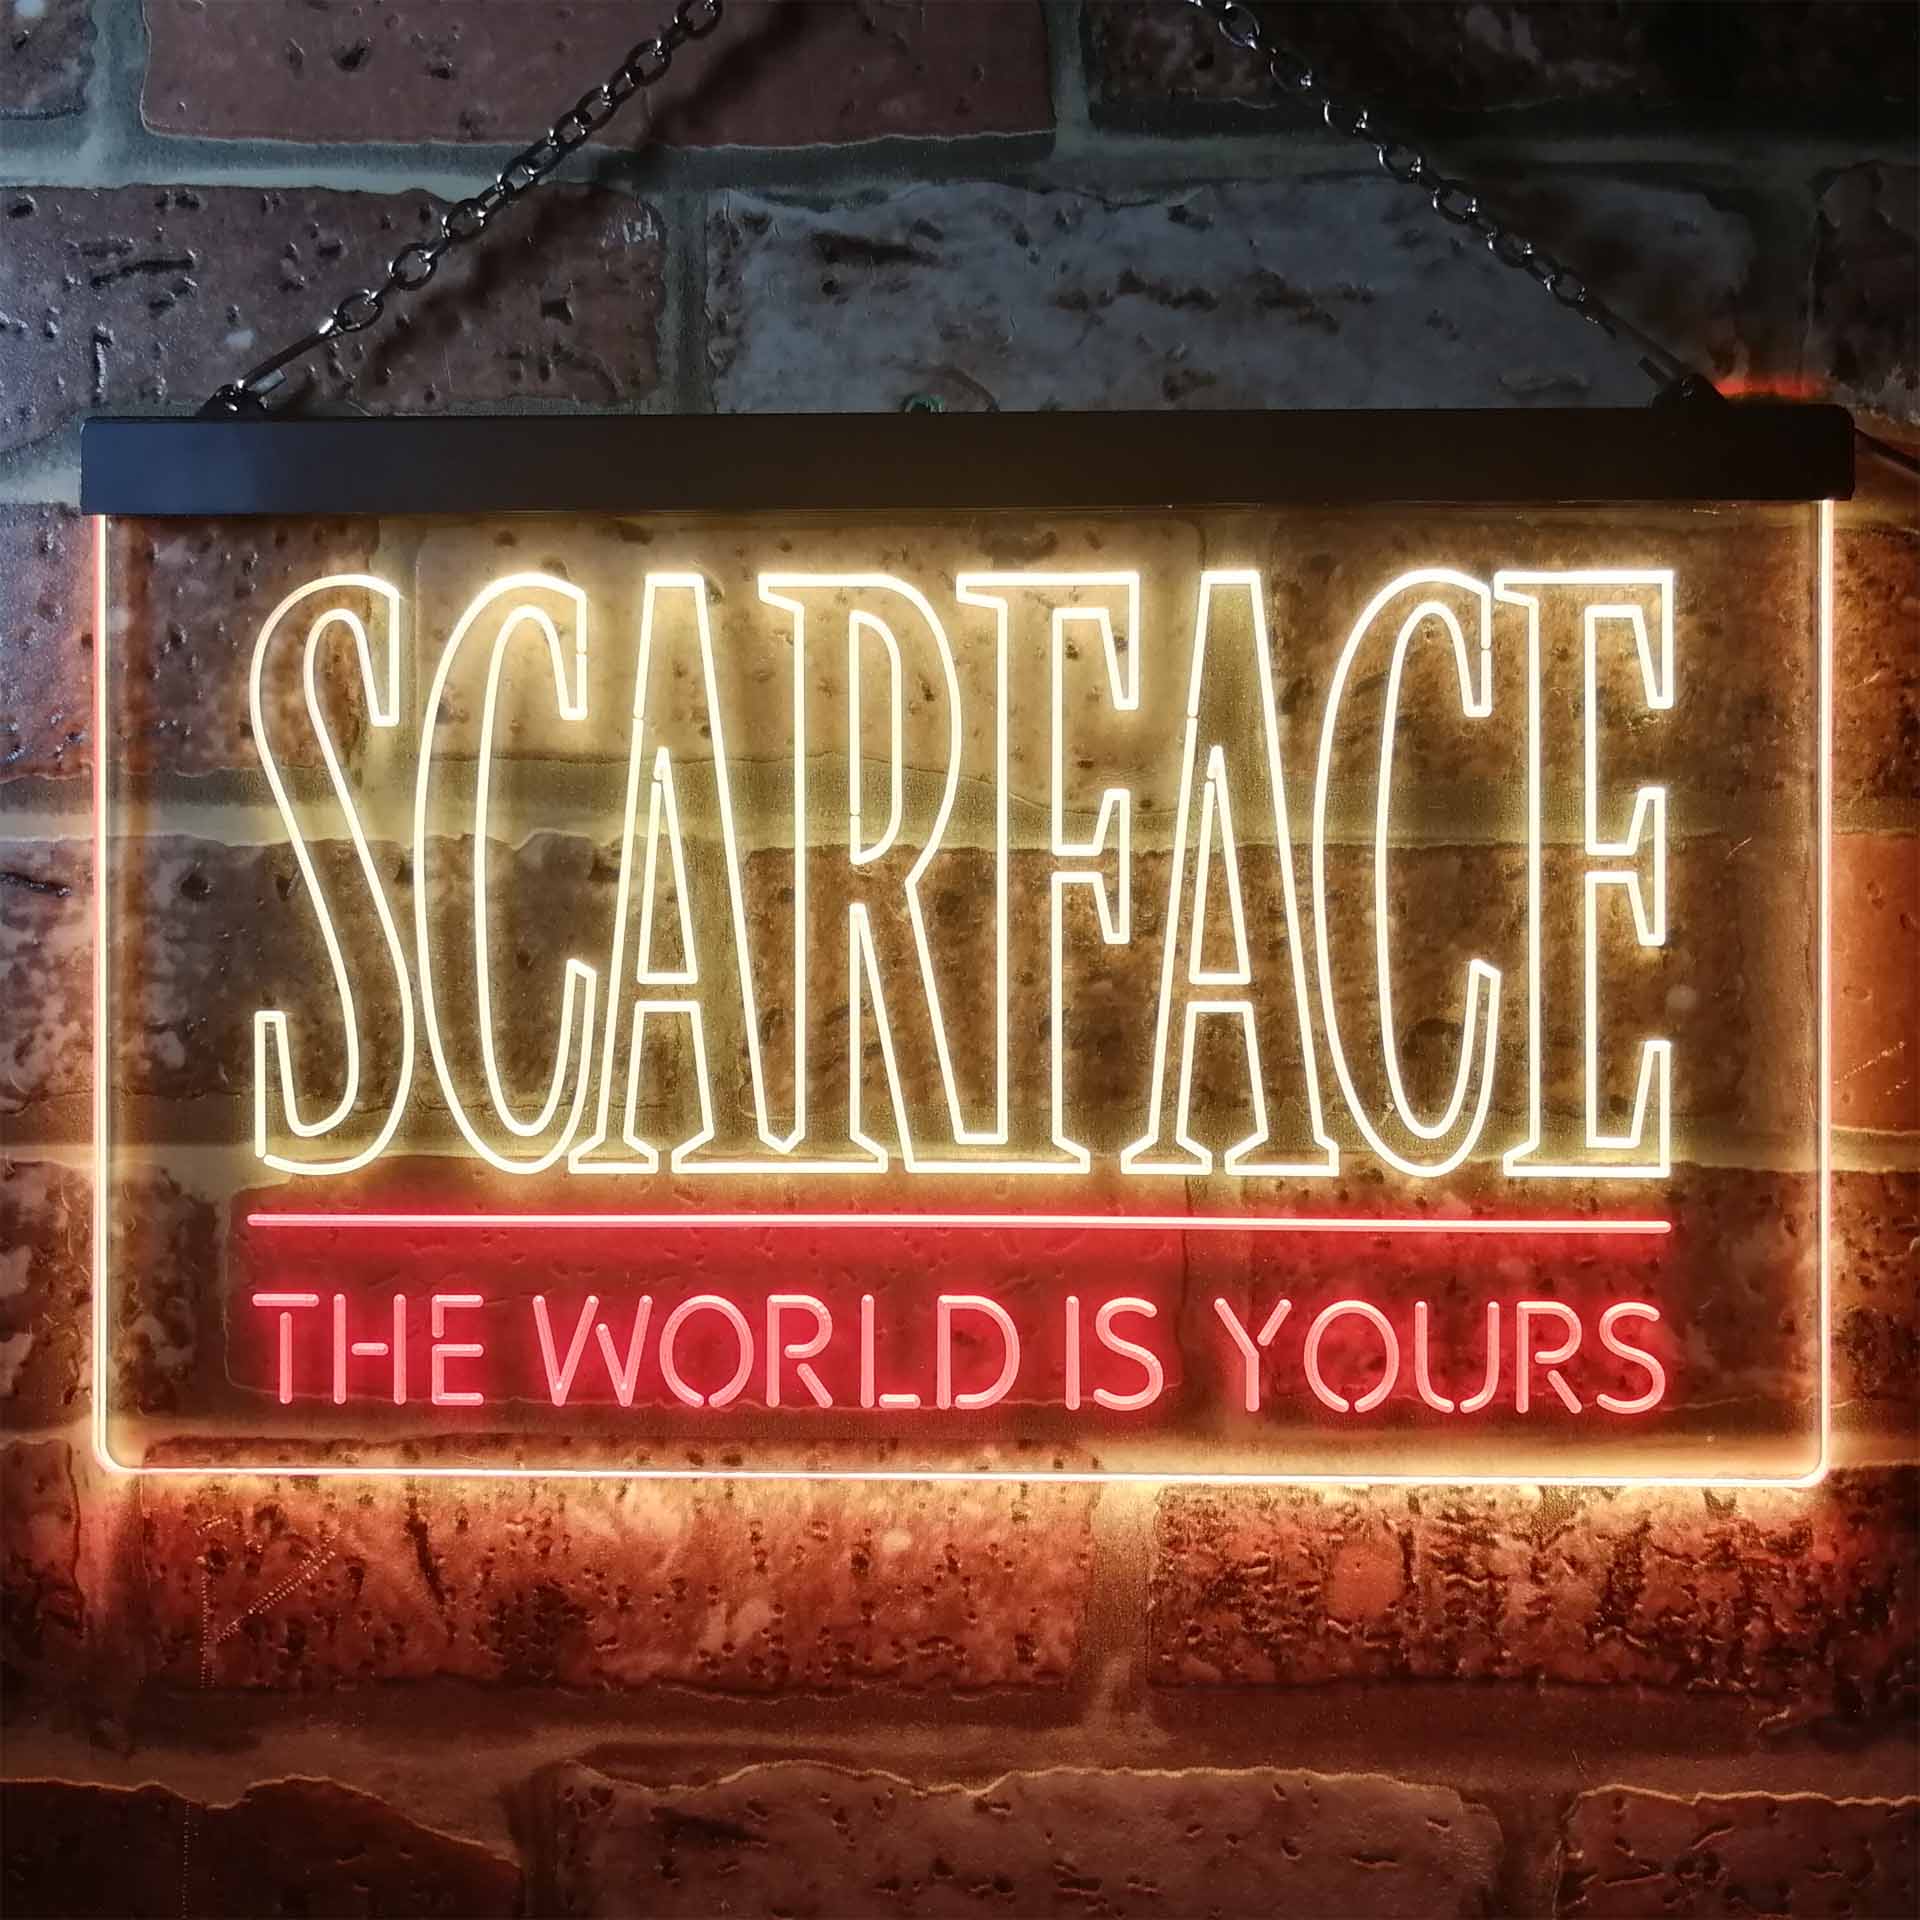 Scarface The World is Yours LED Neon Sign